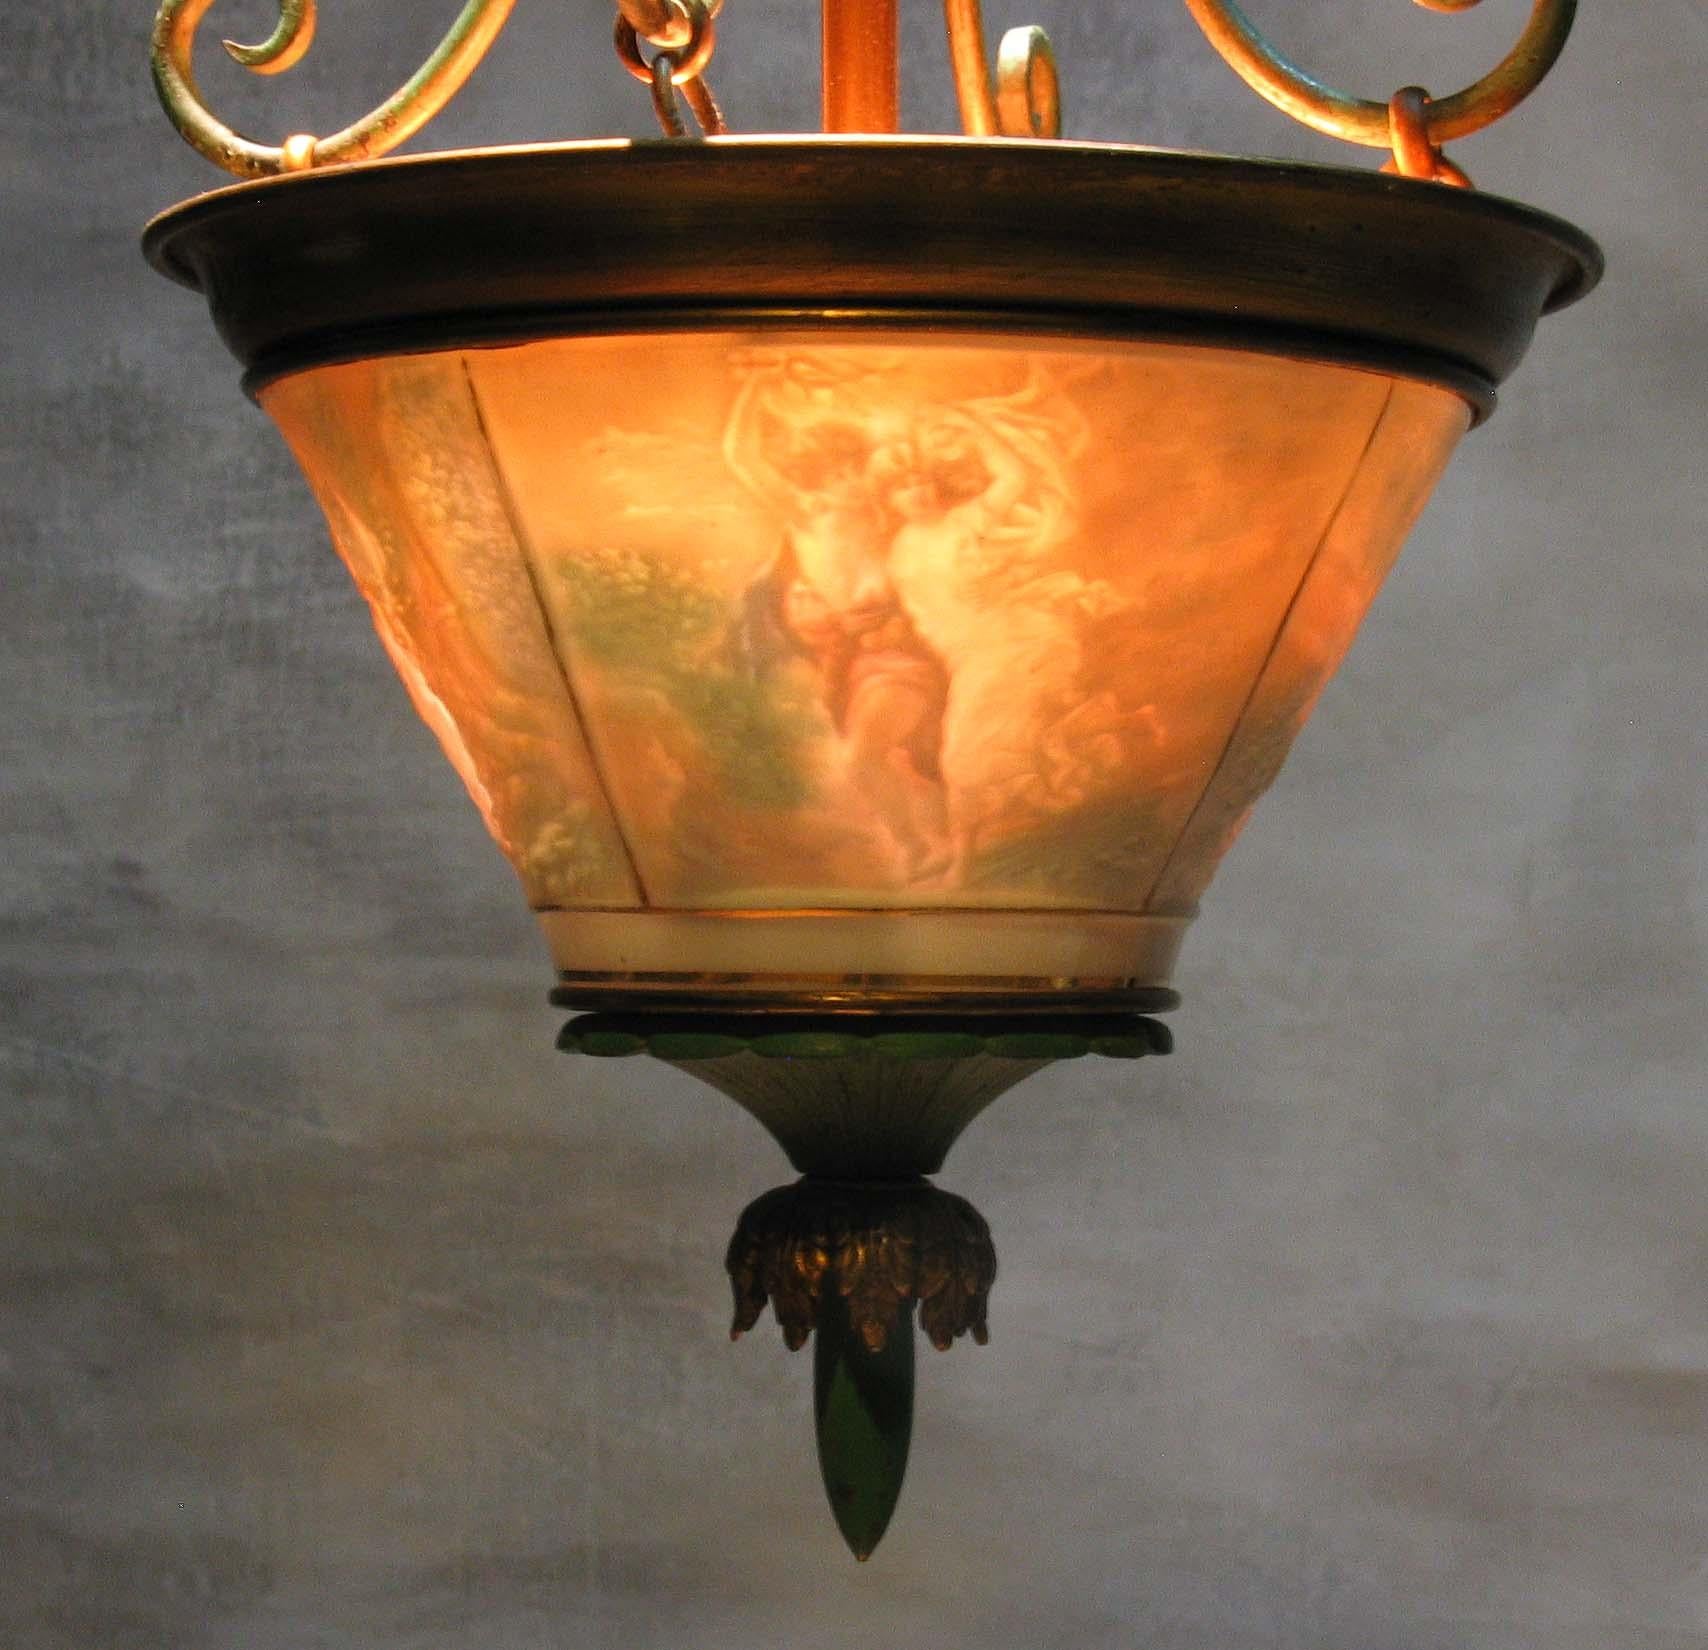 Hand-Crafted Fabulous Wrought Brass and Lithophane Ceiling Light, Early 20th Century